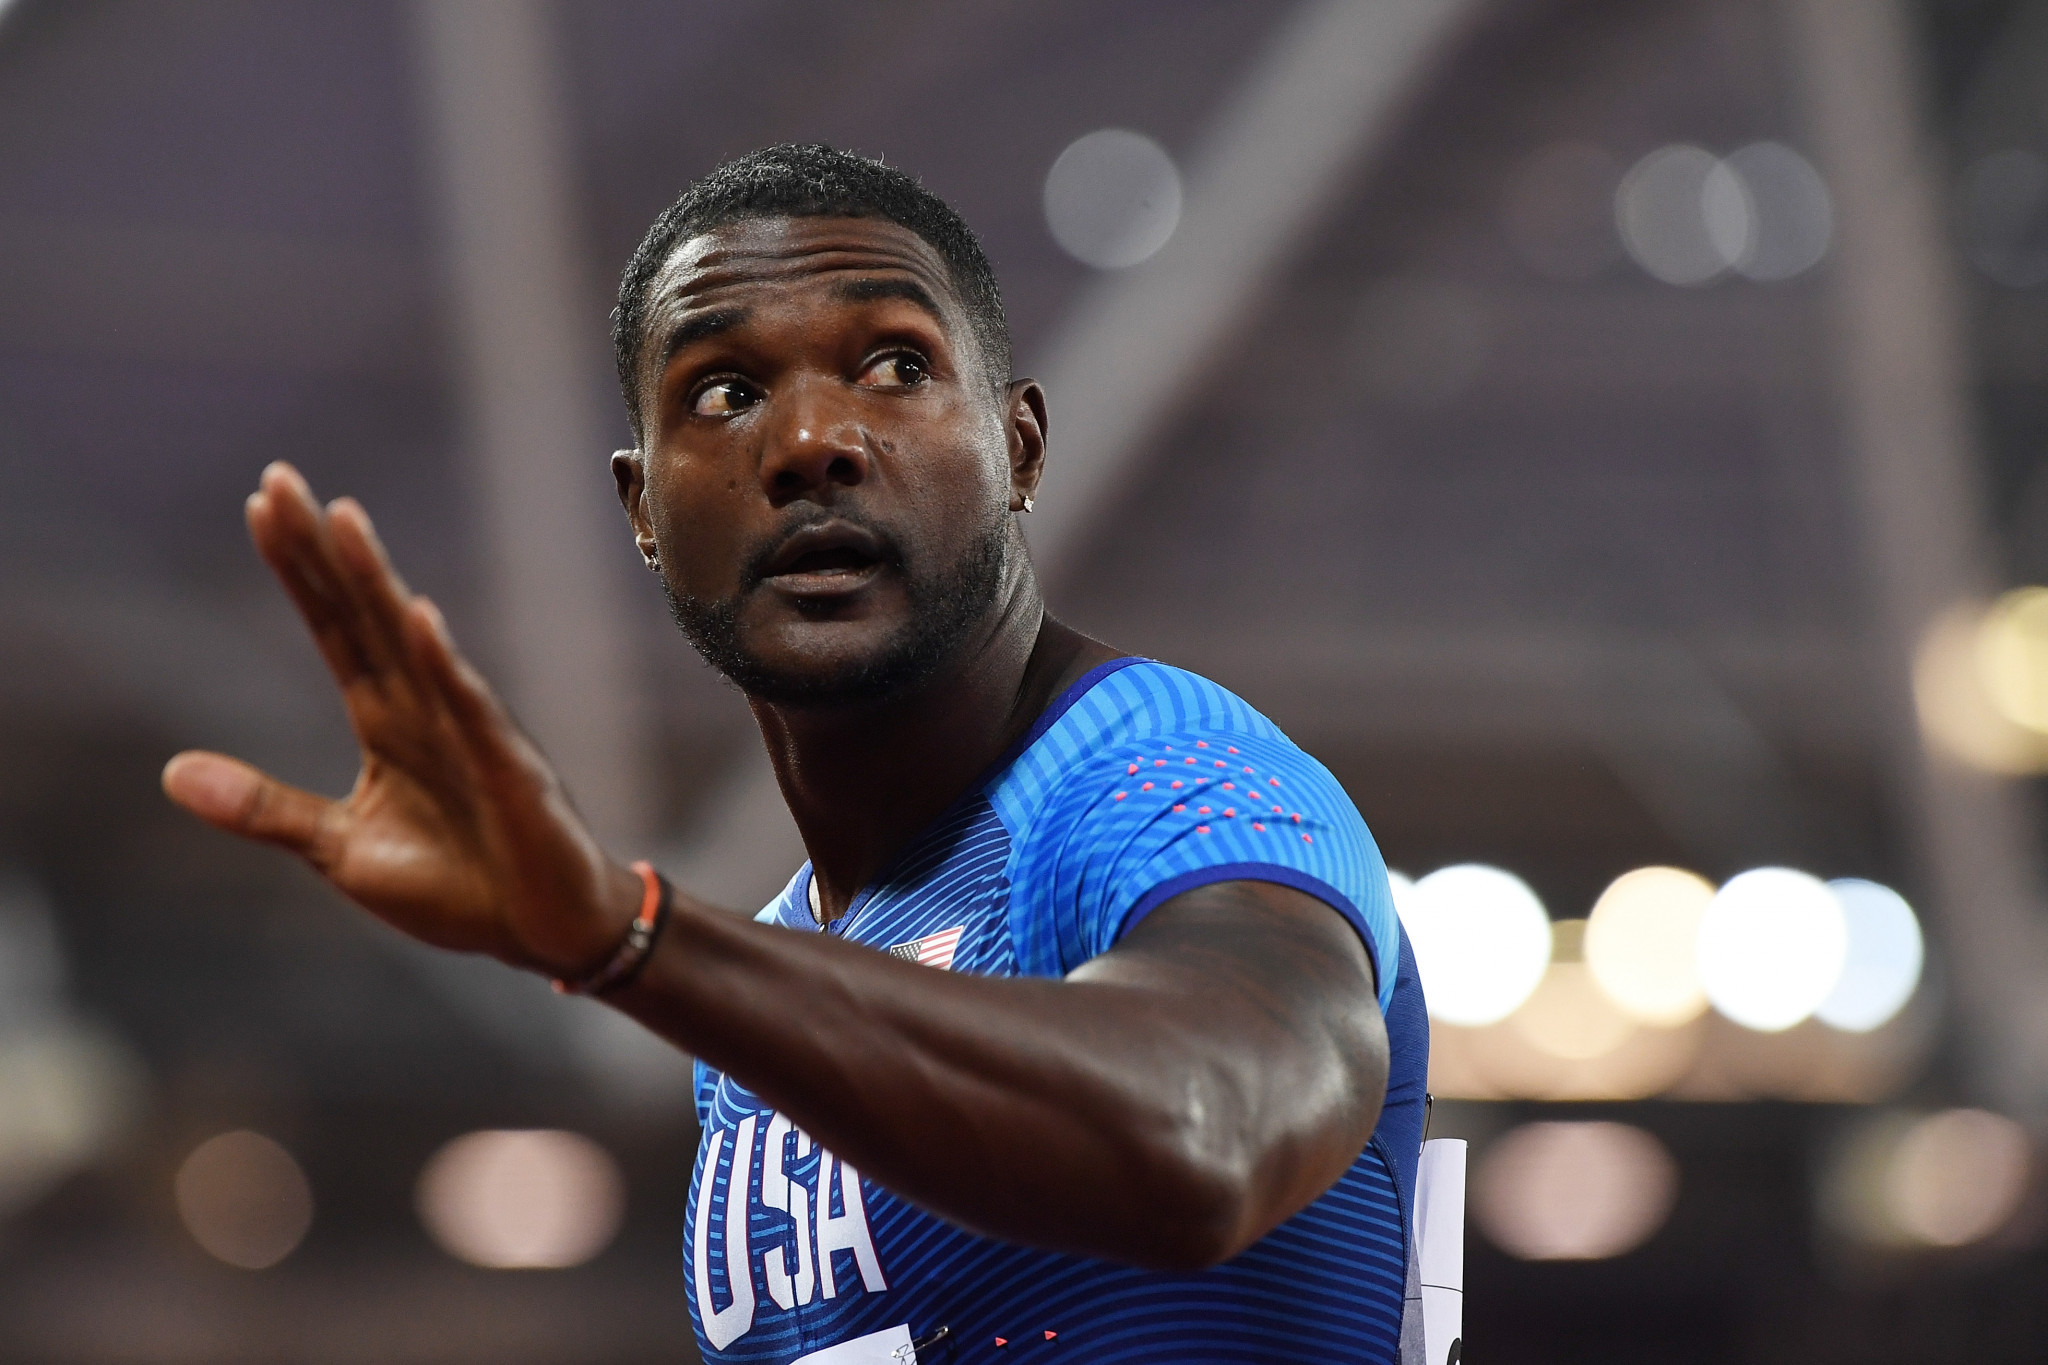 Robert Wagner has claimed Justin Gatlin and 